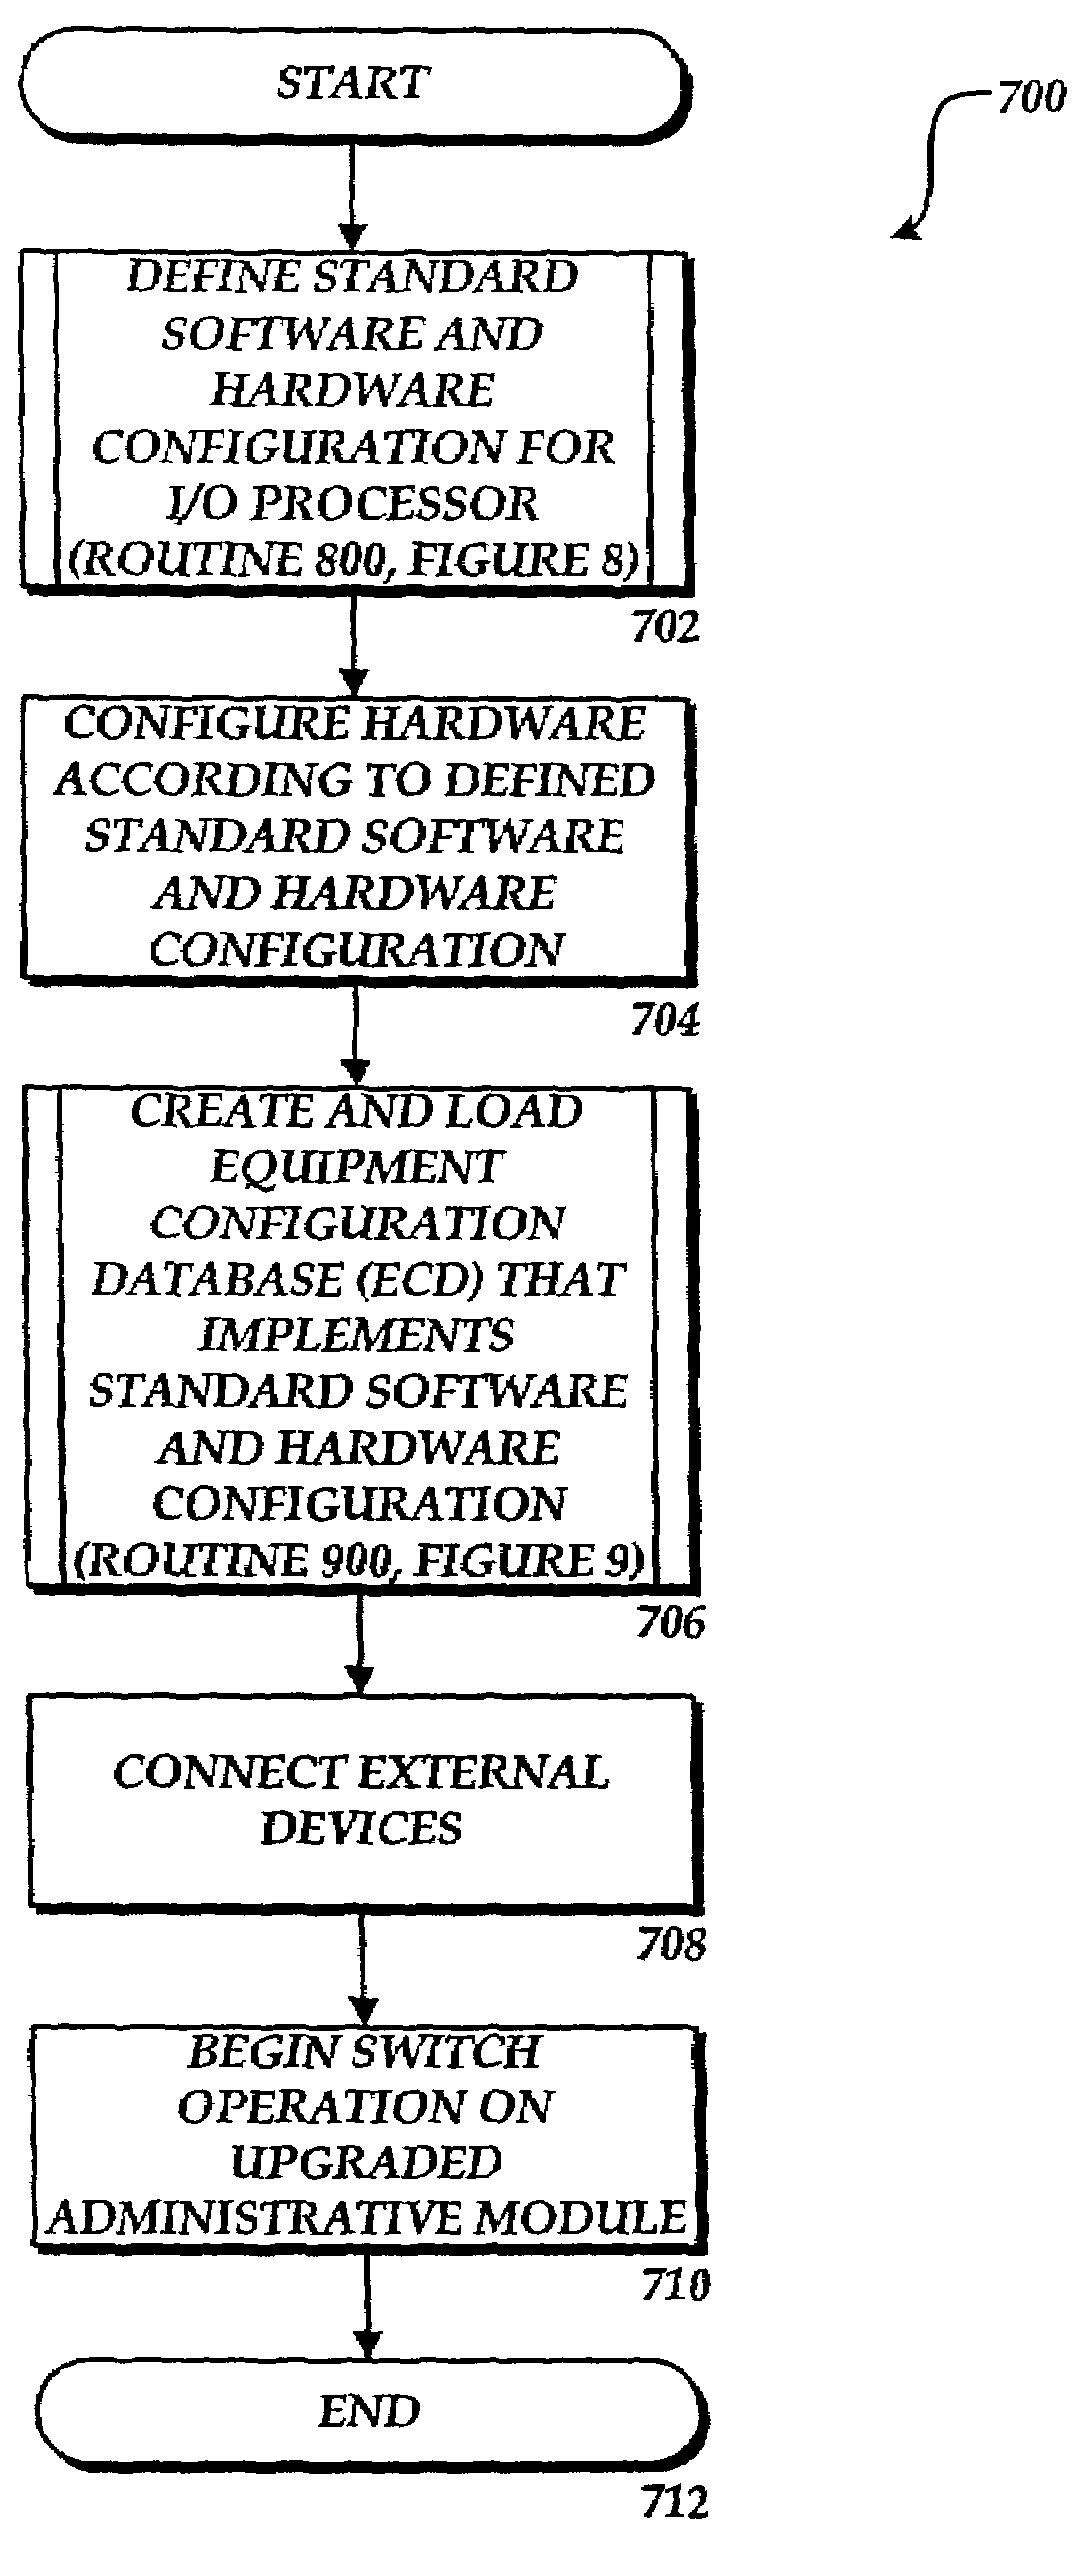 Method for configuring an upgraded administrative module computer in an electronic switching system